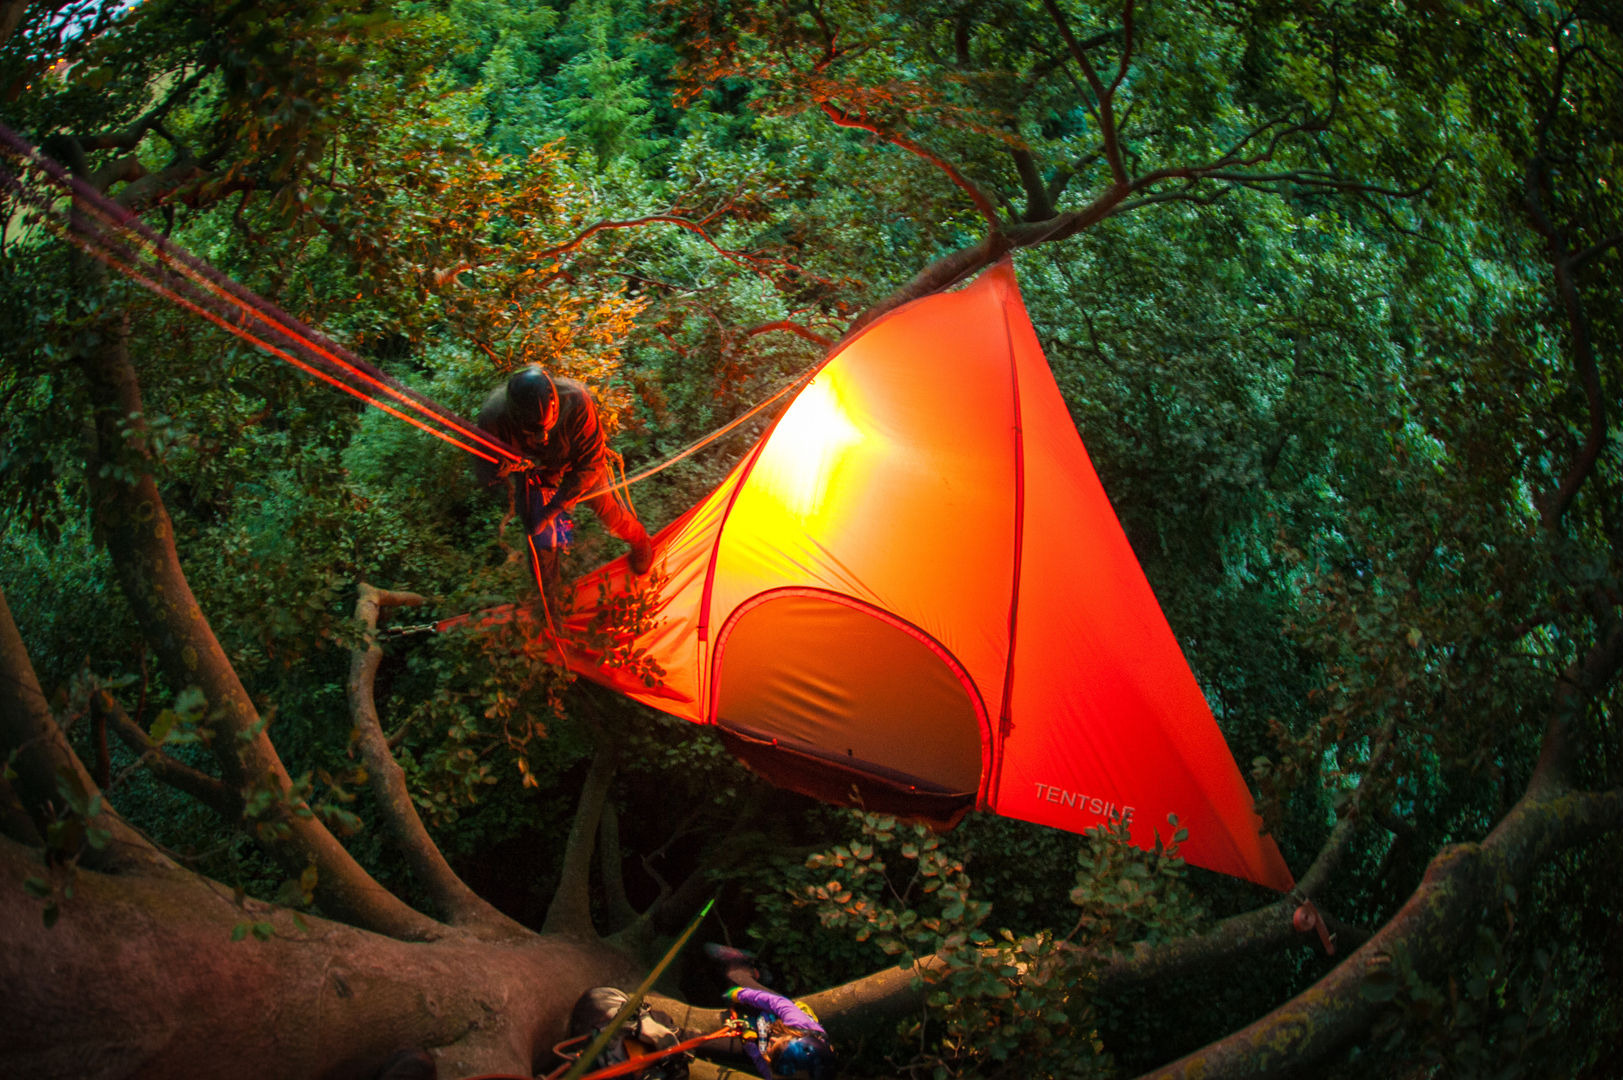 Add a New Touch to Your Camping Adventure with the Tentsile Stingray, Tentsile Tentsile Jardines modernos Columpios y zonas de juego